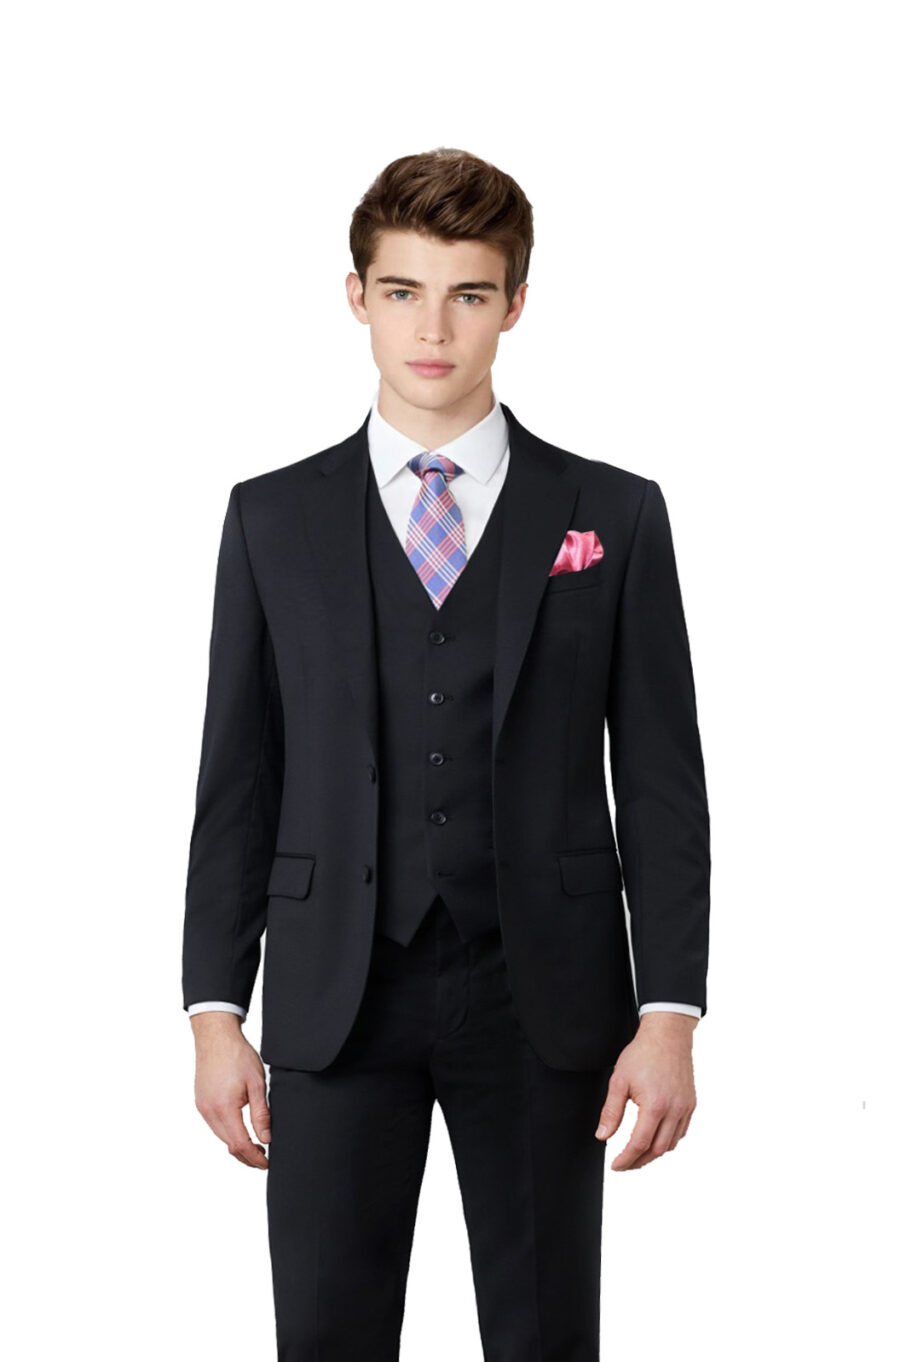 Tailored Suit - Tailor Made Suits